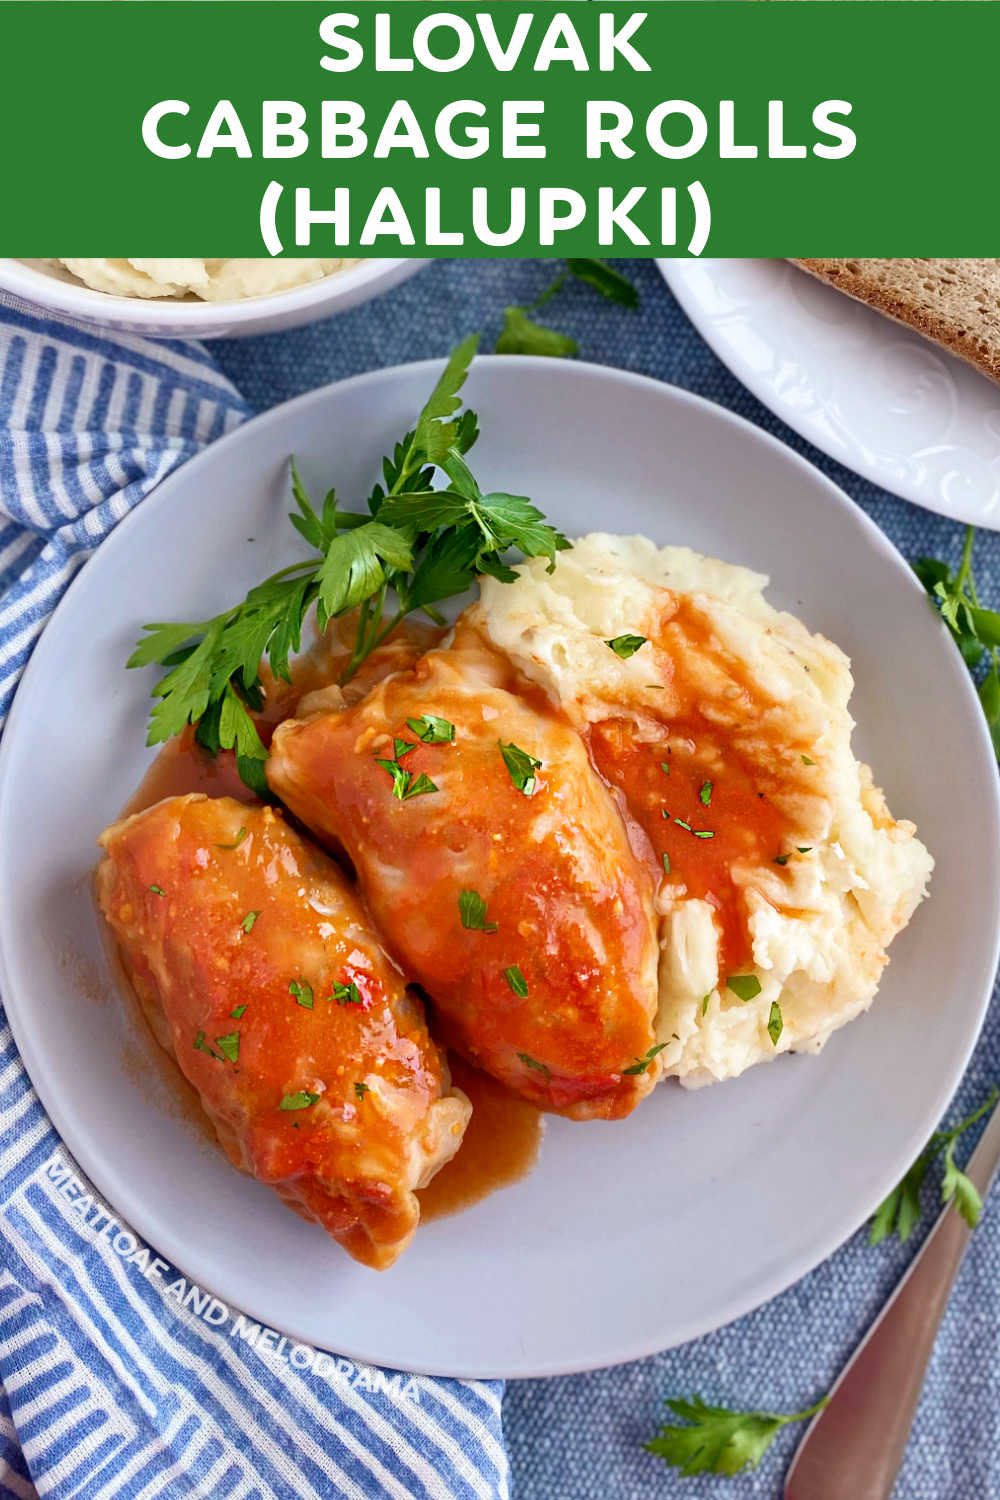 Grandma's Cabbage Rolls (Slovak Halupki) recipe are stuffed with beef, pork, rice and simmered in tomato soup! Pressure cook or bake in the oven and enjoy this favorite comfort food for a special occasion or family dinner! via @meamel